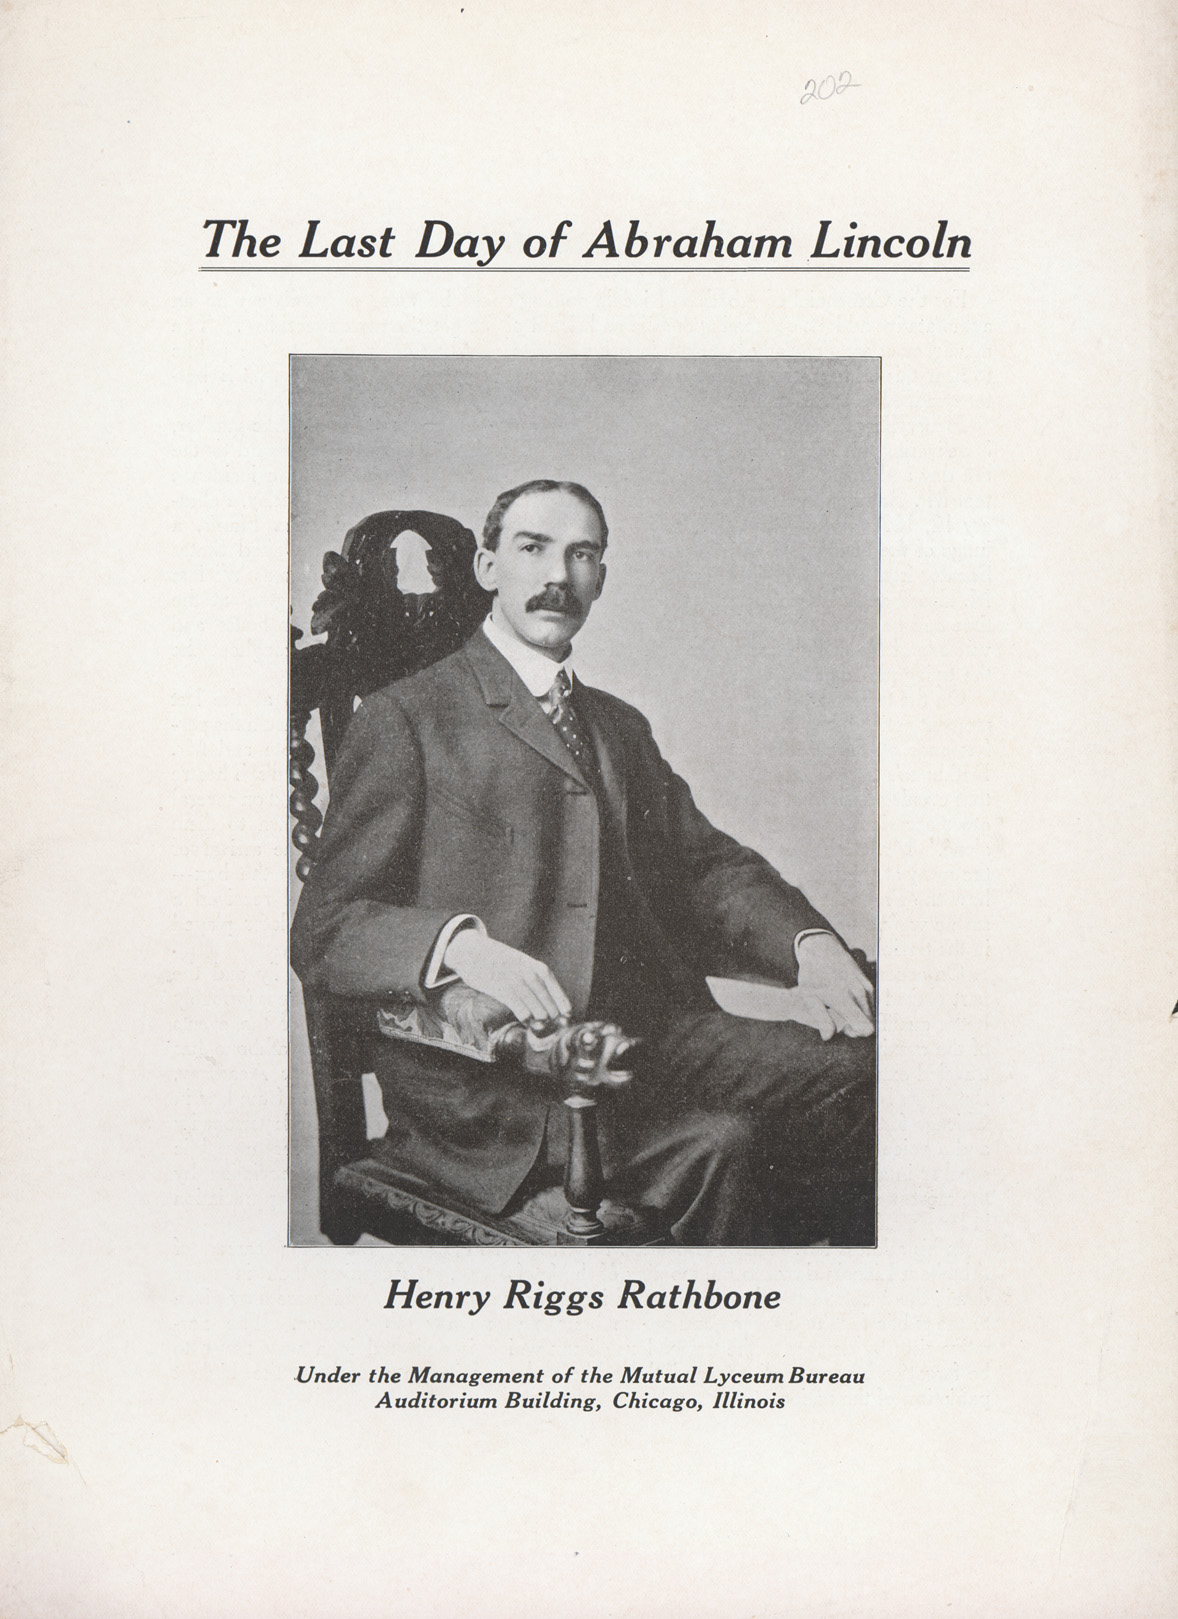 The Last Day of Abraham Lincoln - by Henry Riggs Rathbone